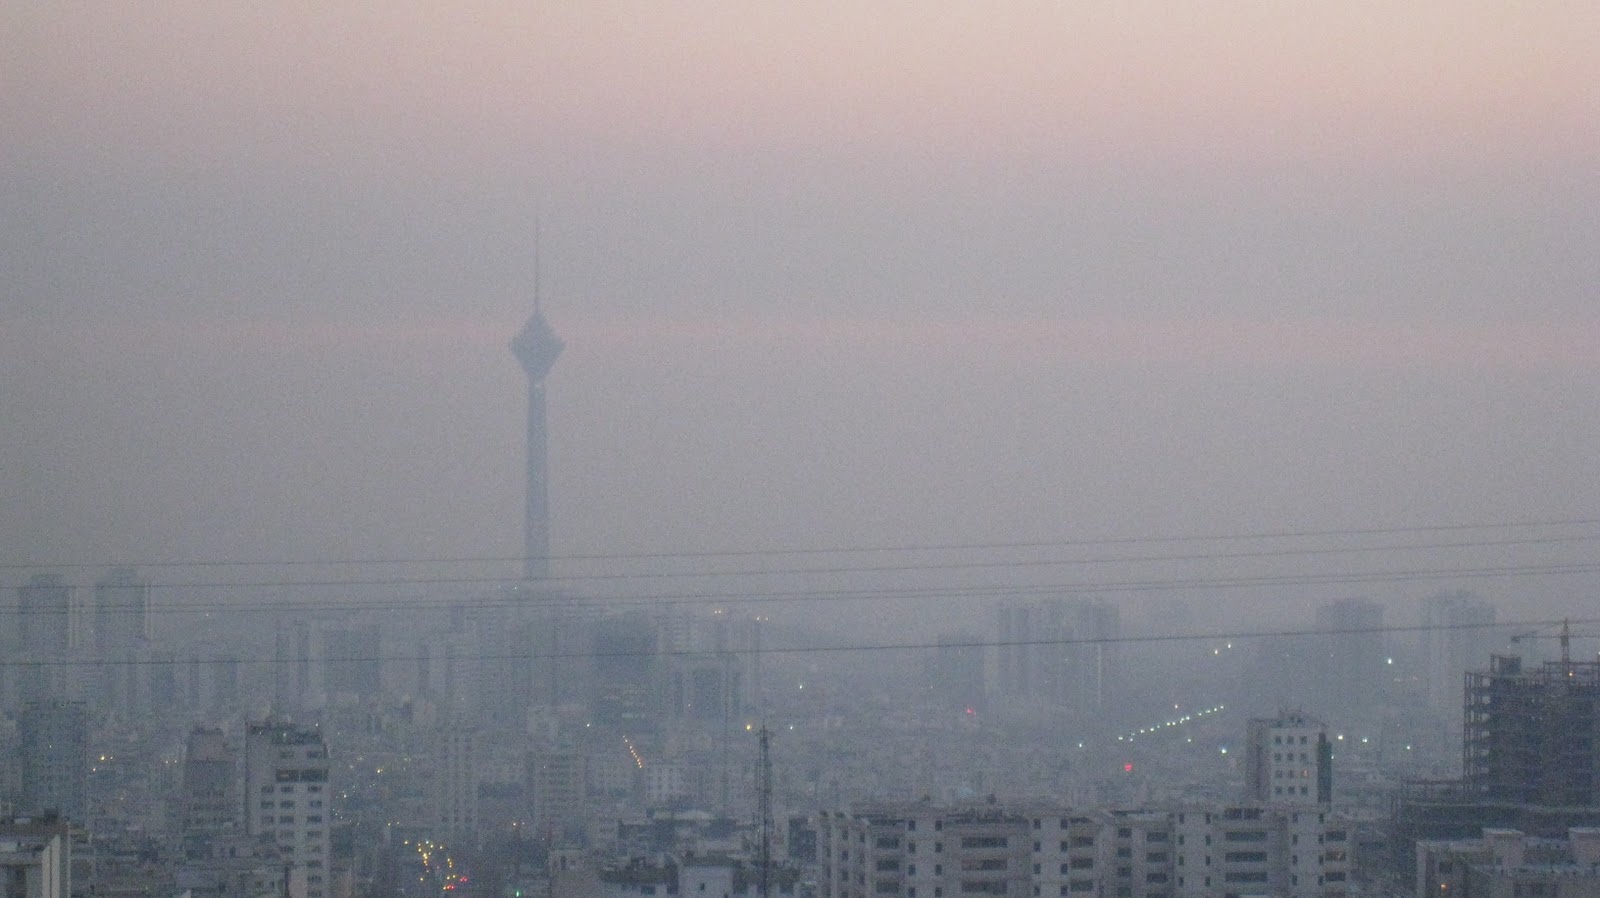 Air pollution causes about 21,000 deaths per year in Iran.